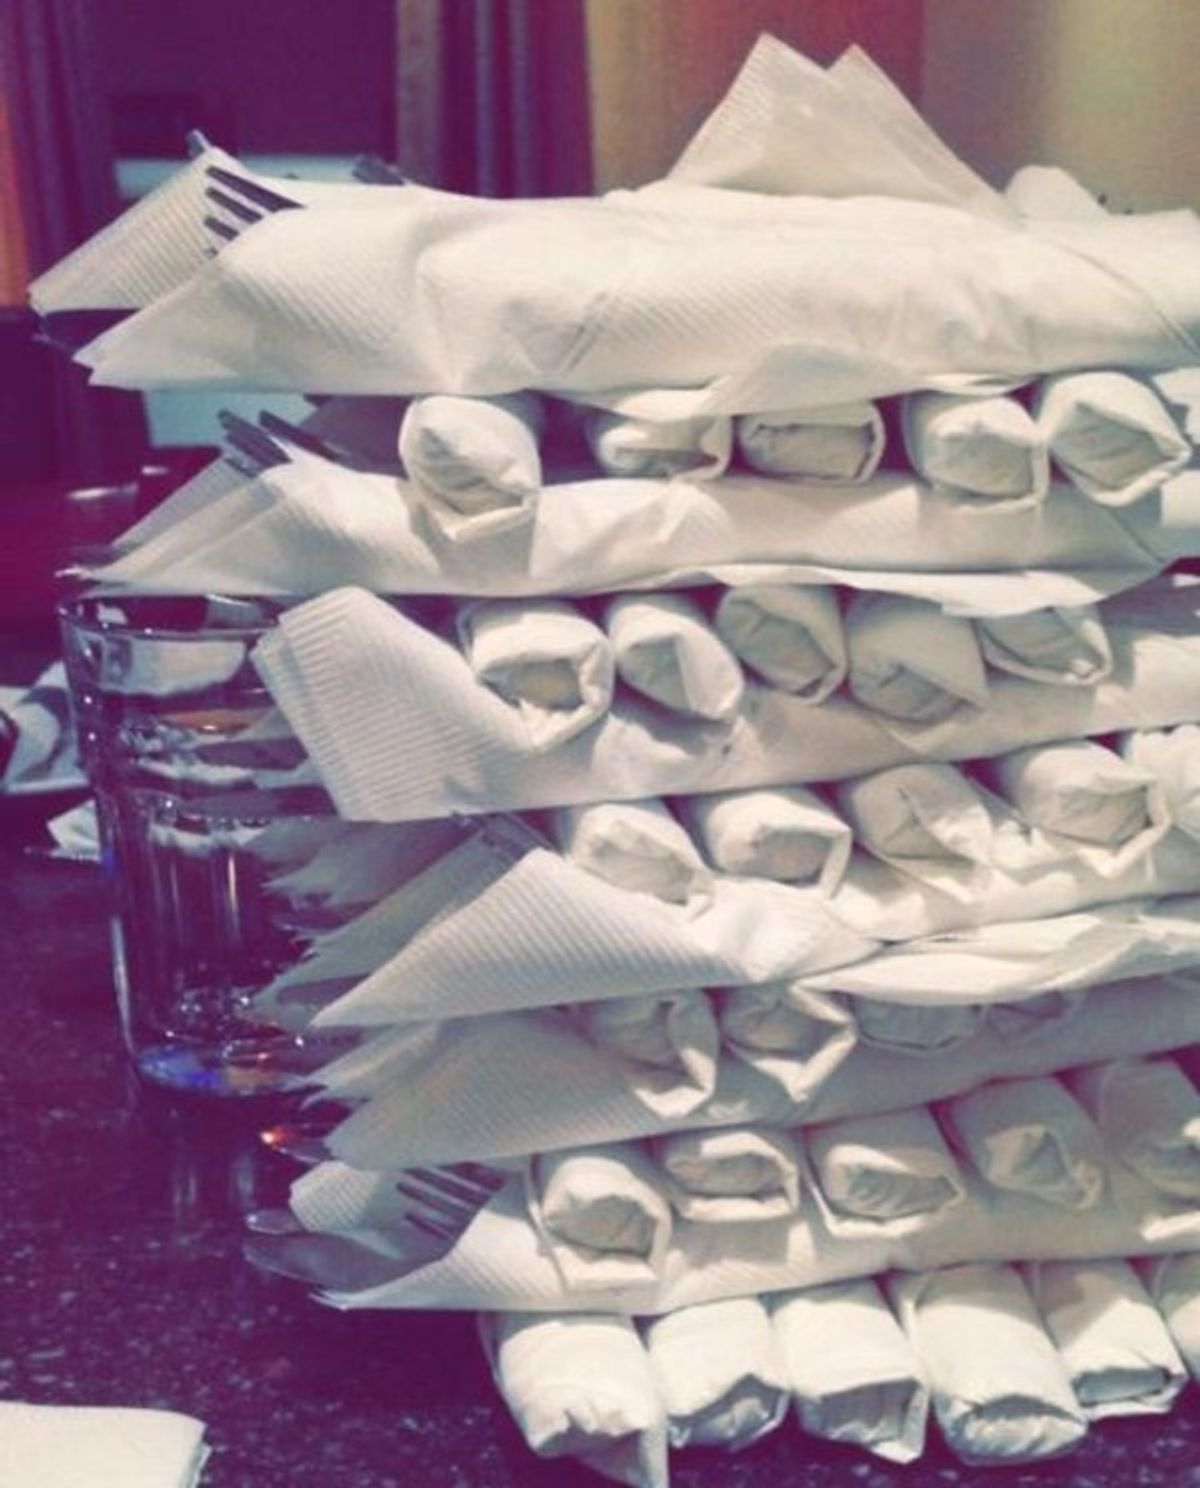 15 Struggles Only Servers Will Understand